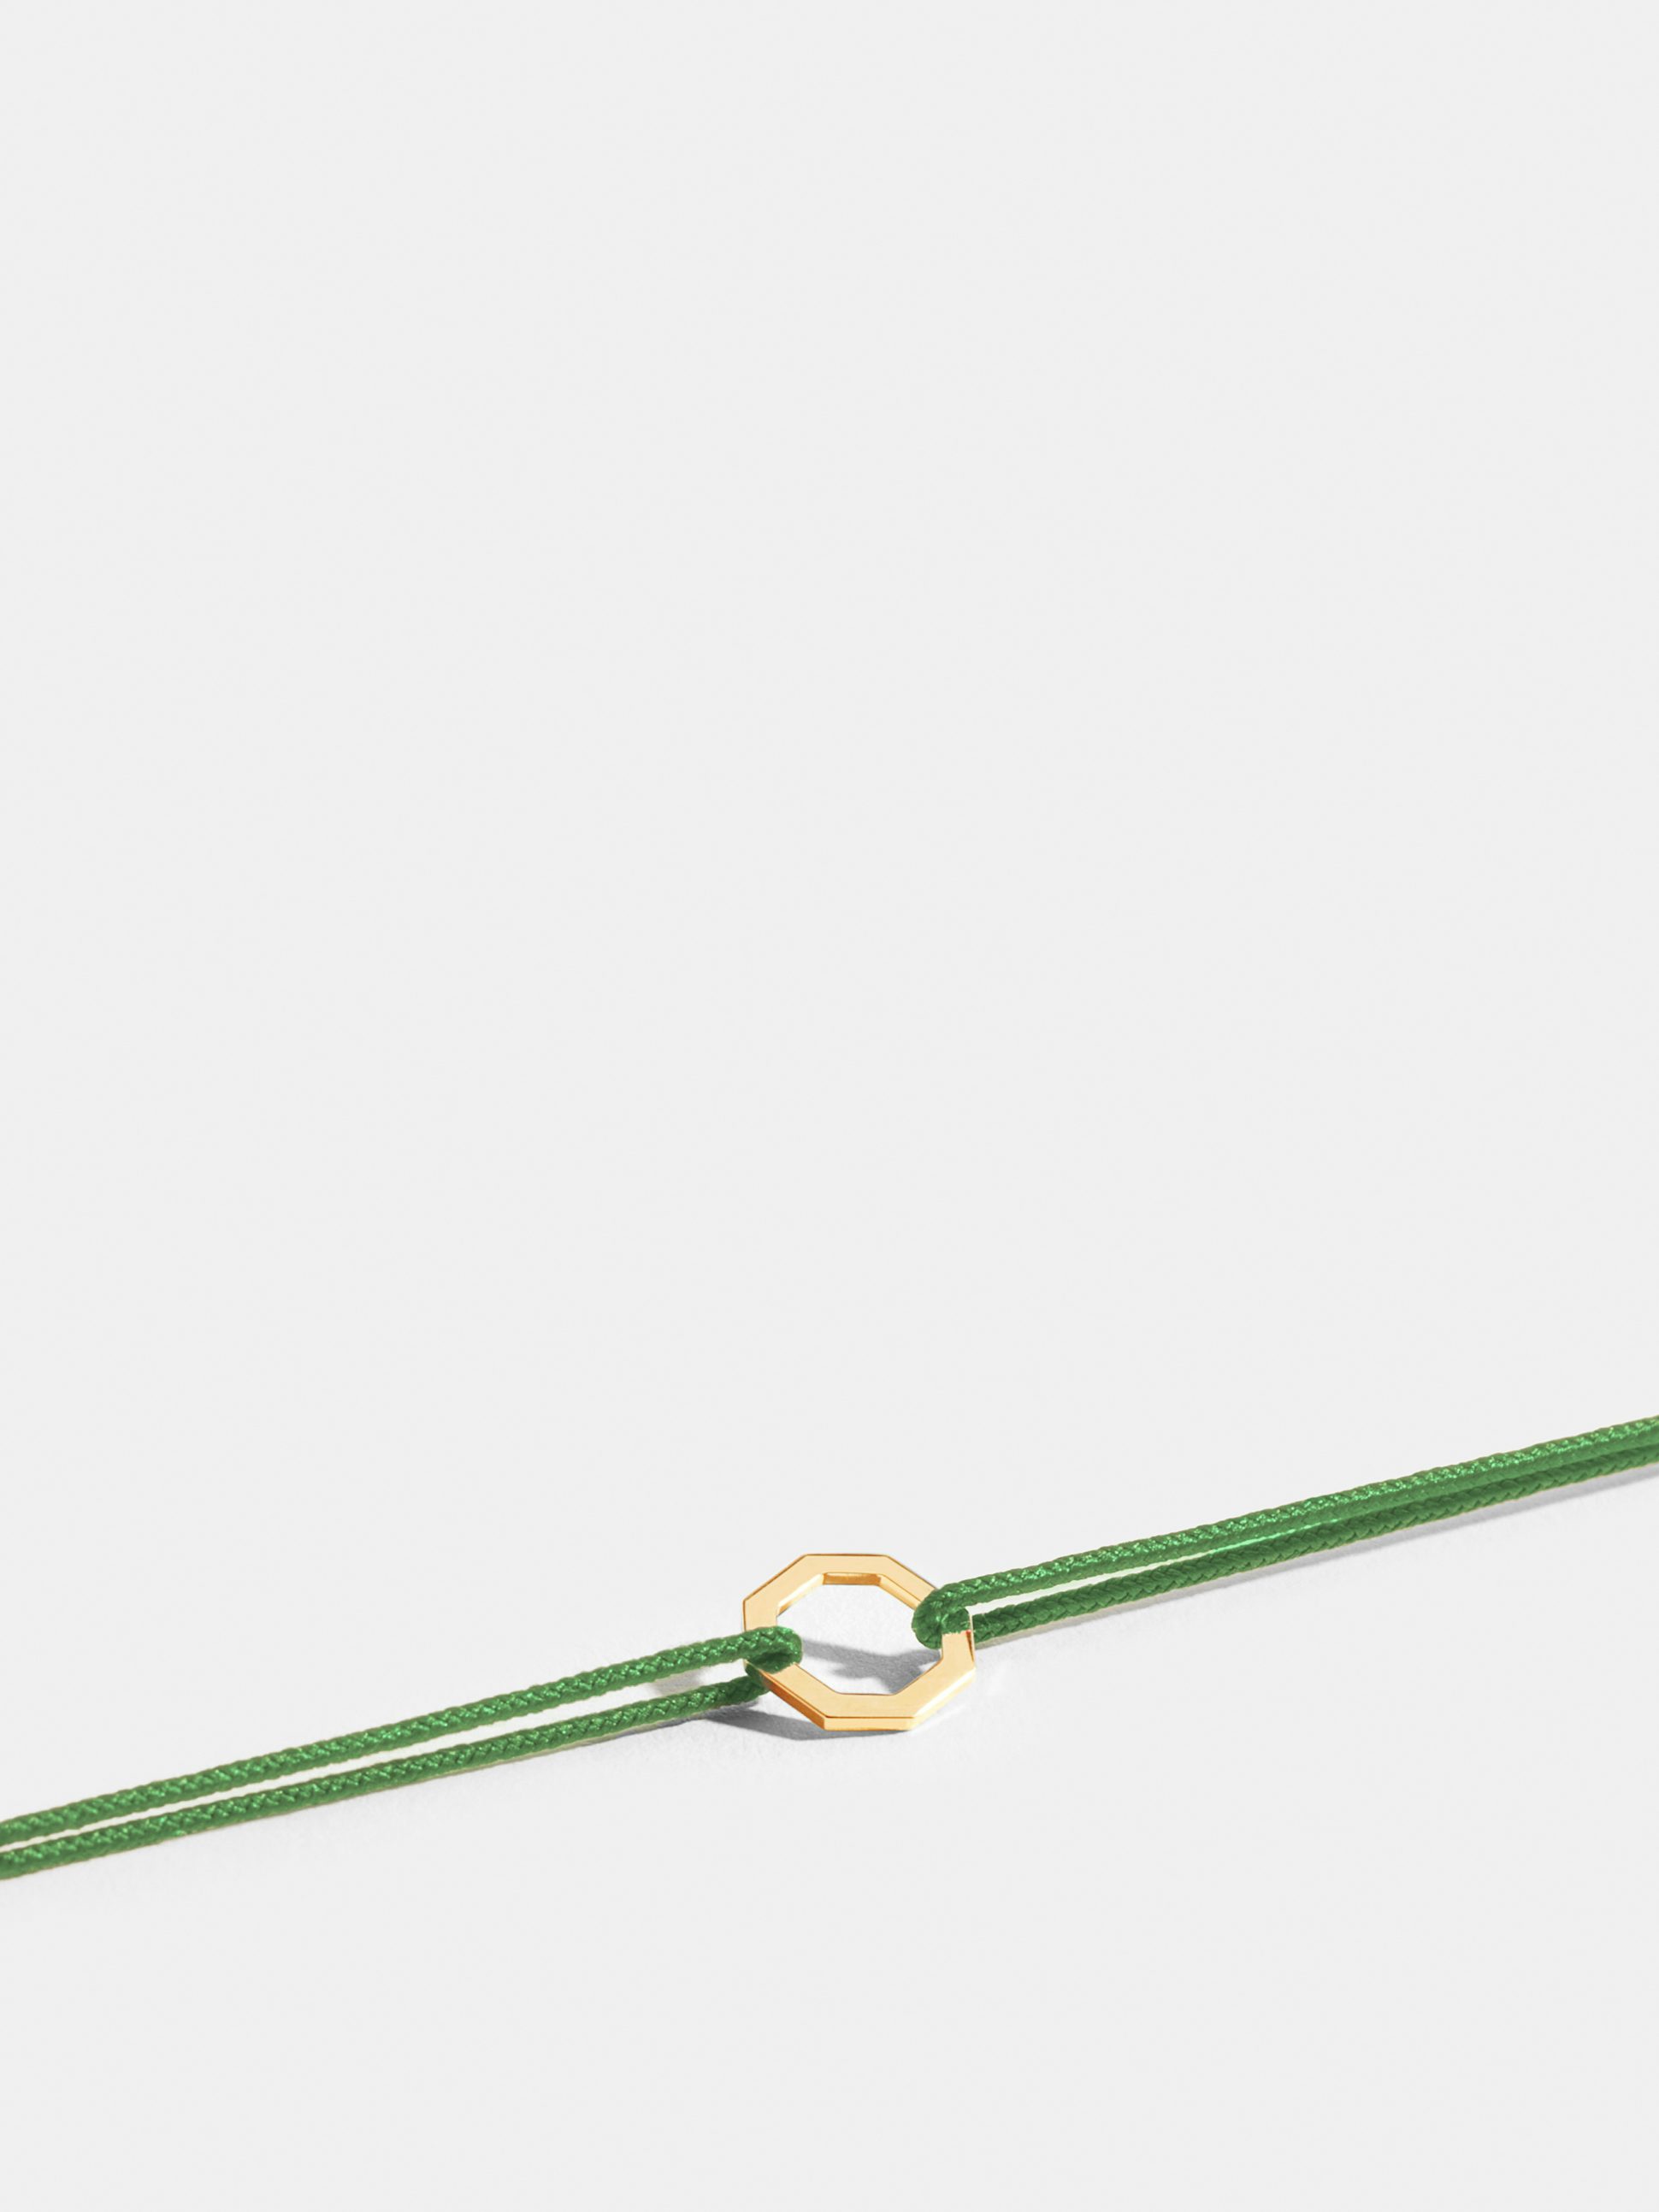 Octogone motif in 18k Fairmined ethical yellow gold, on an apple green cord. 